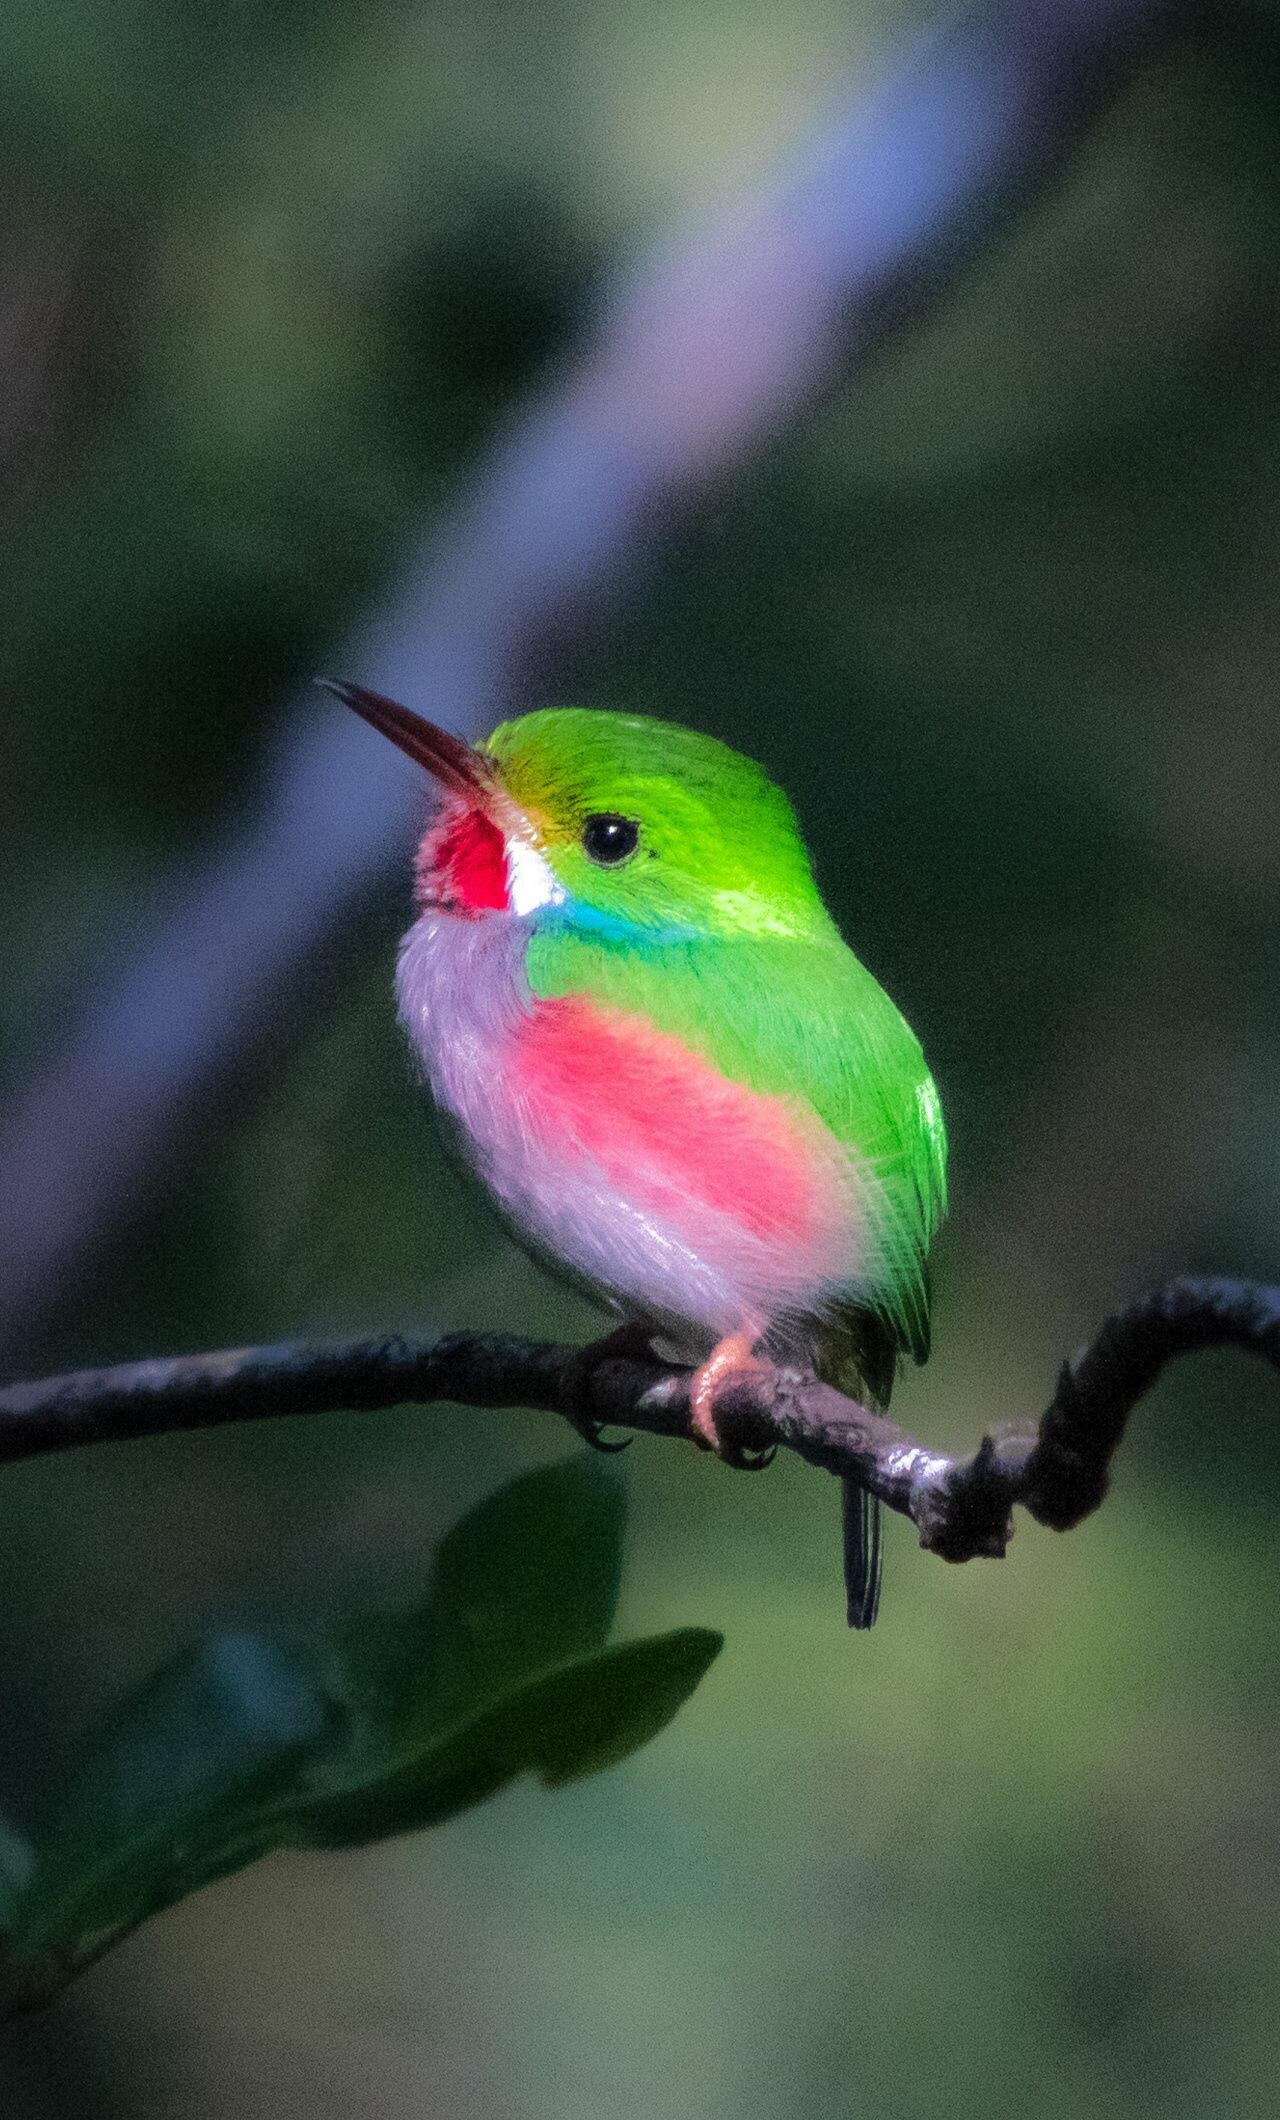 Bird: Broad-billed tody, Small insectivorous species, characterized by their bright green feathers, pink flanks and red throats. 1280x2120 HD Background.